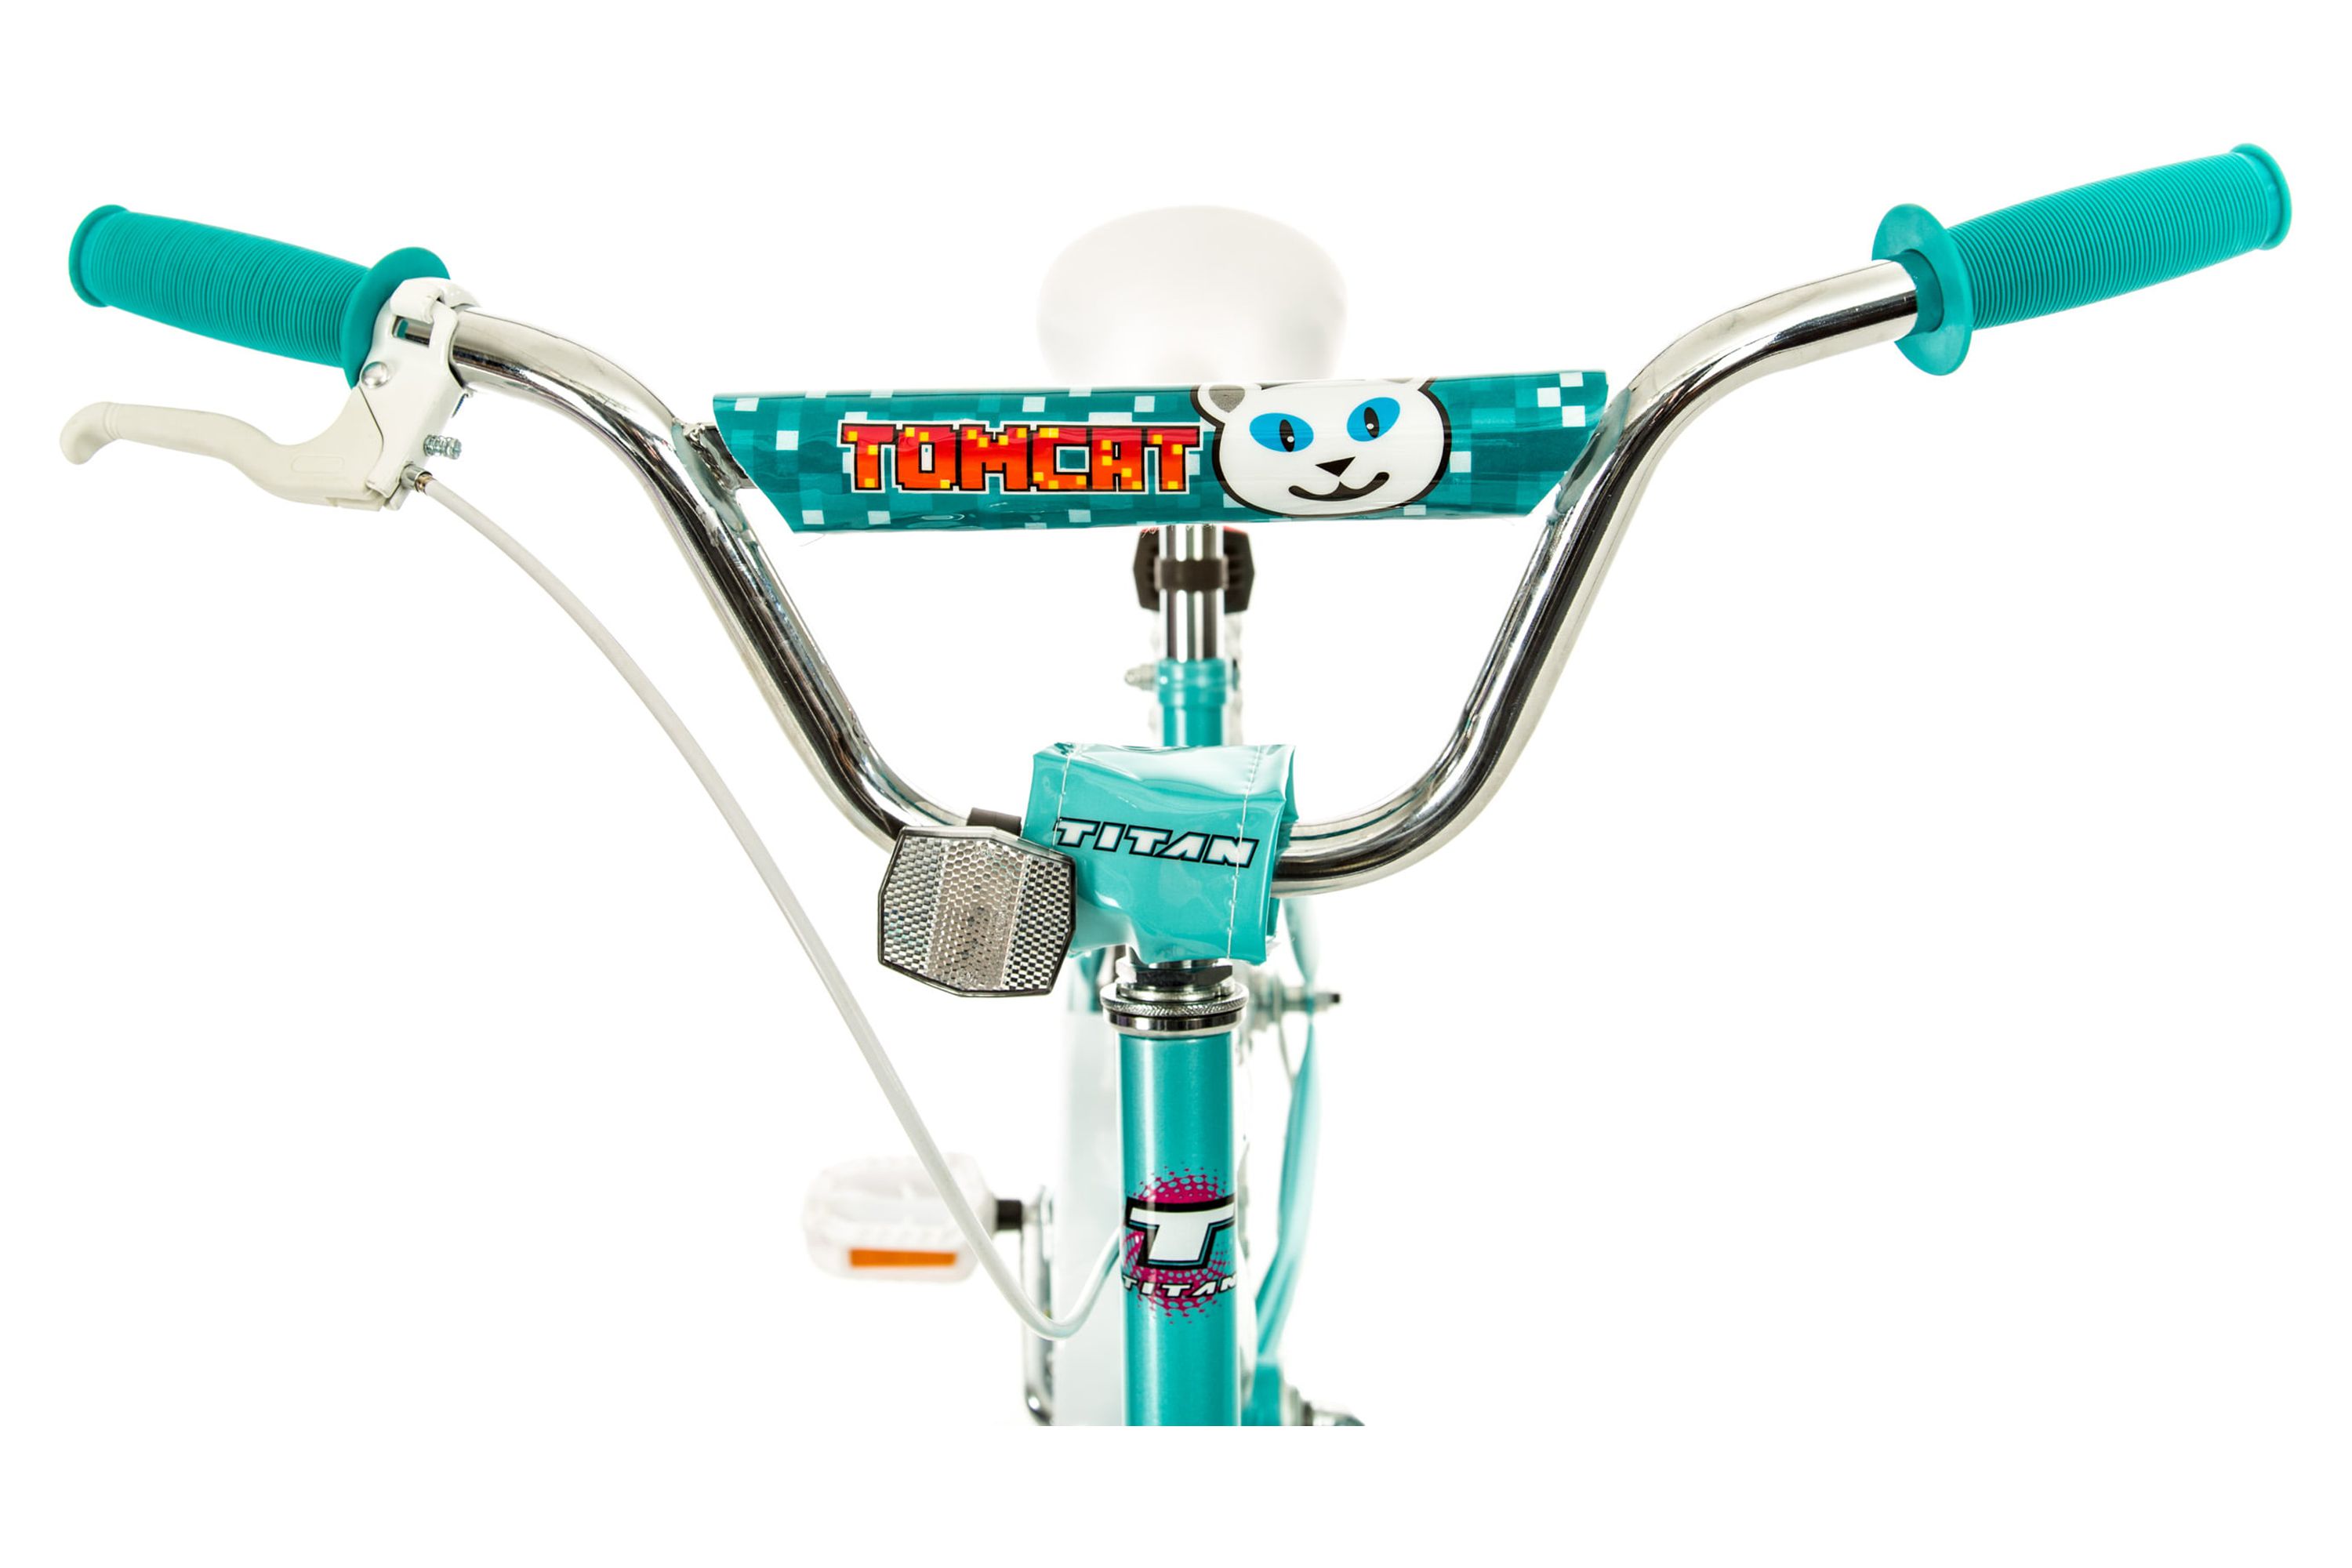 Titan 20 In. Tomcat Girls BMX Bike with Pads, Teal Blue - image 4 of 5